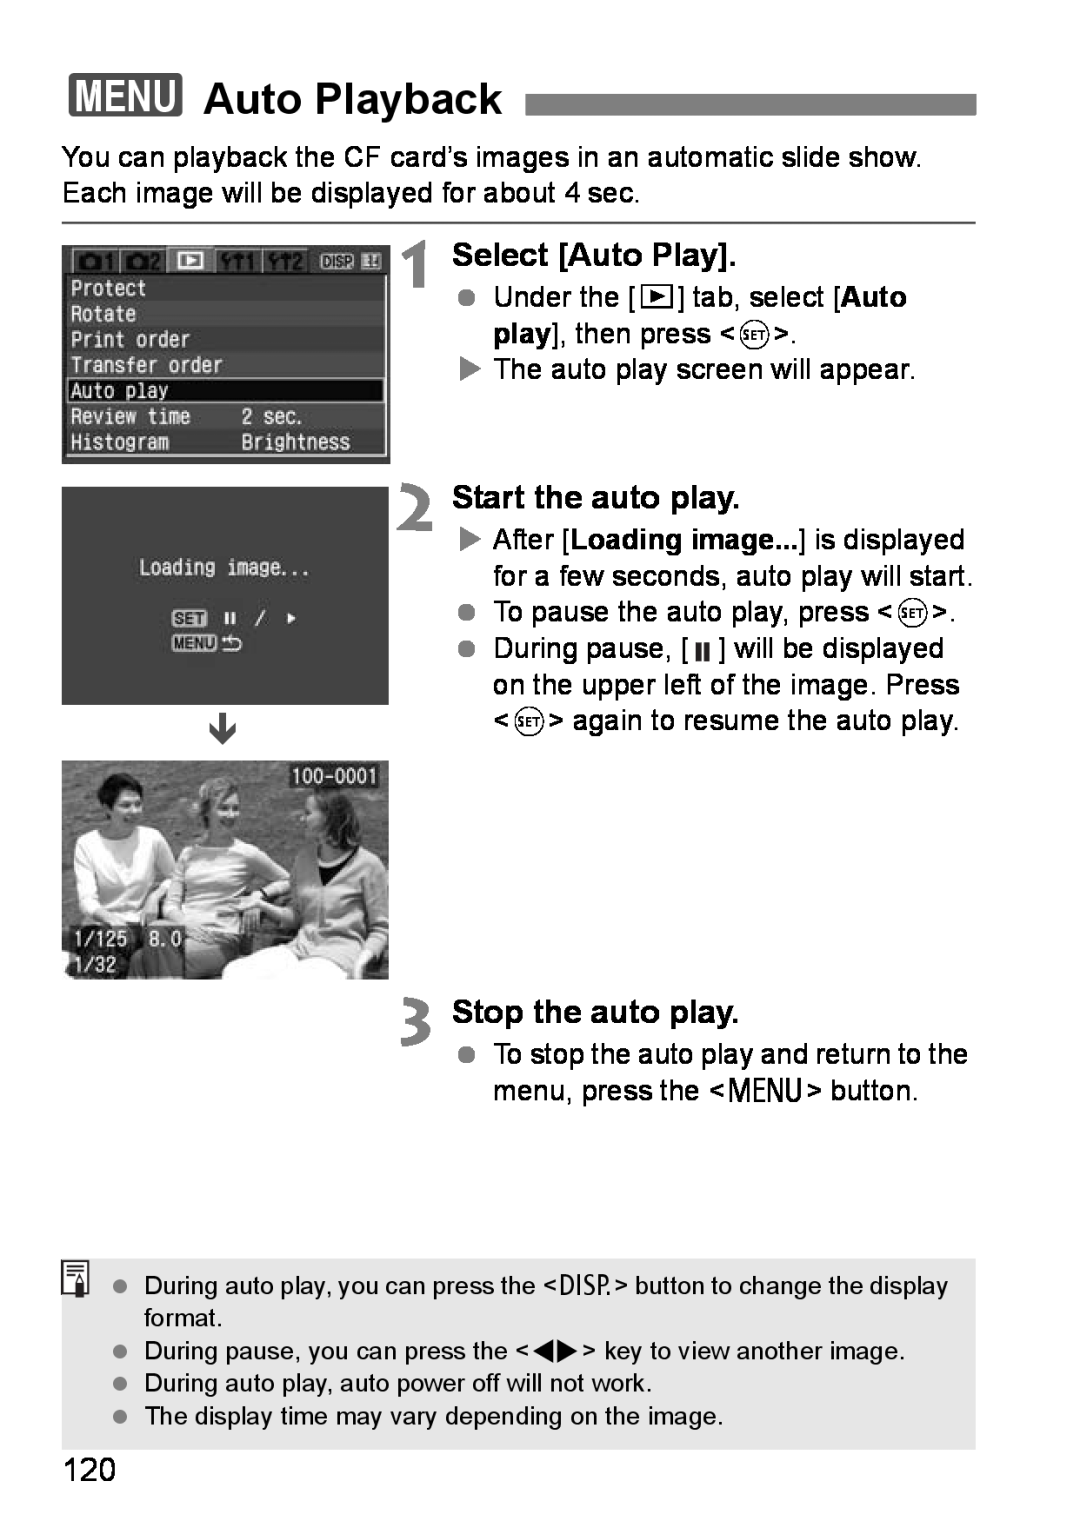 Canon EOS DIGITAL REBEL XTI instruction manual 3Auto Playback, Select Auto Play, Start the auto play, Stop the auto play 